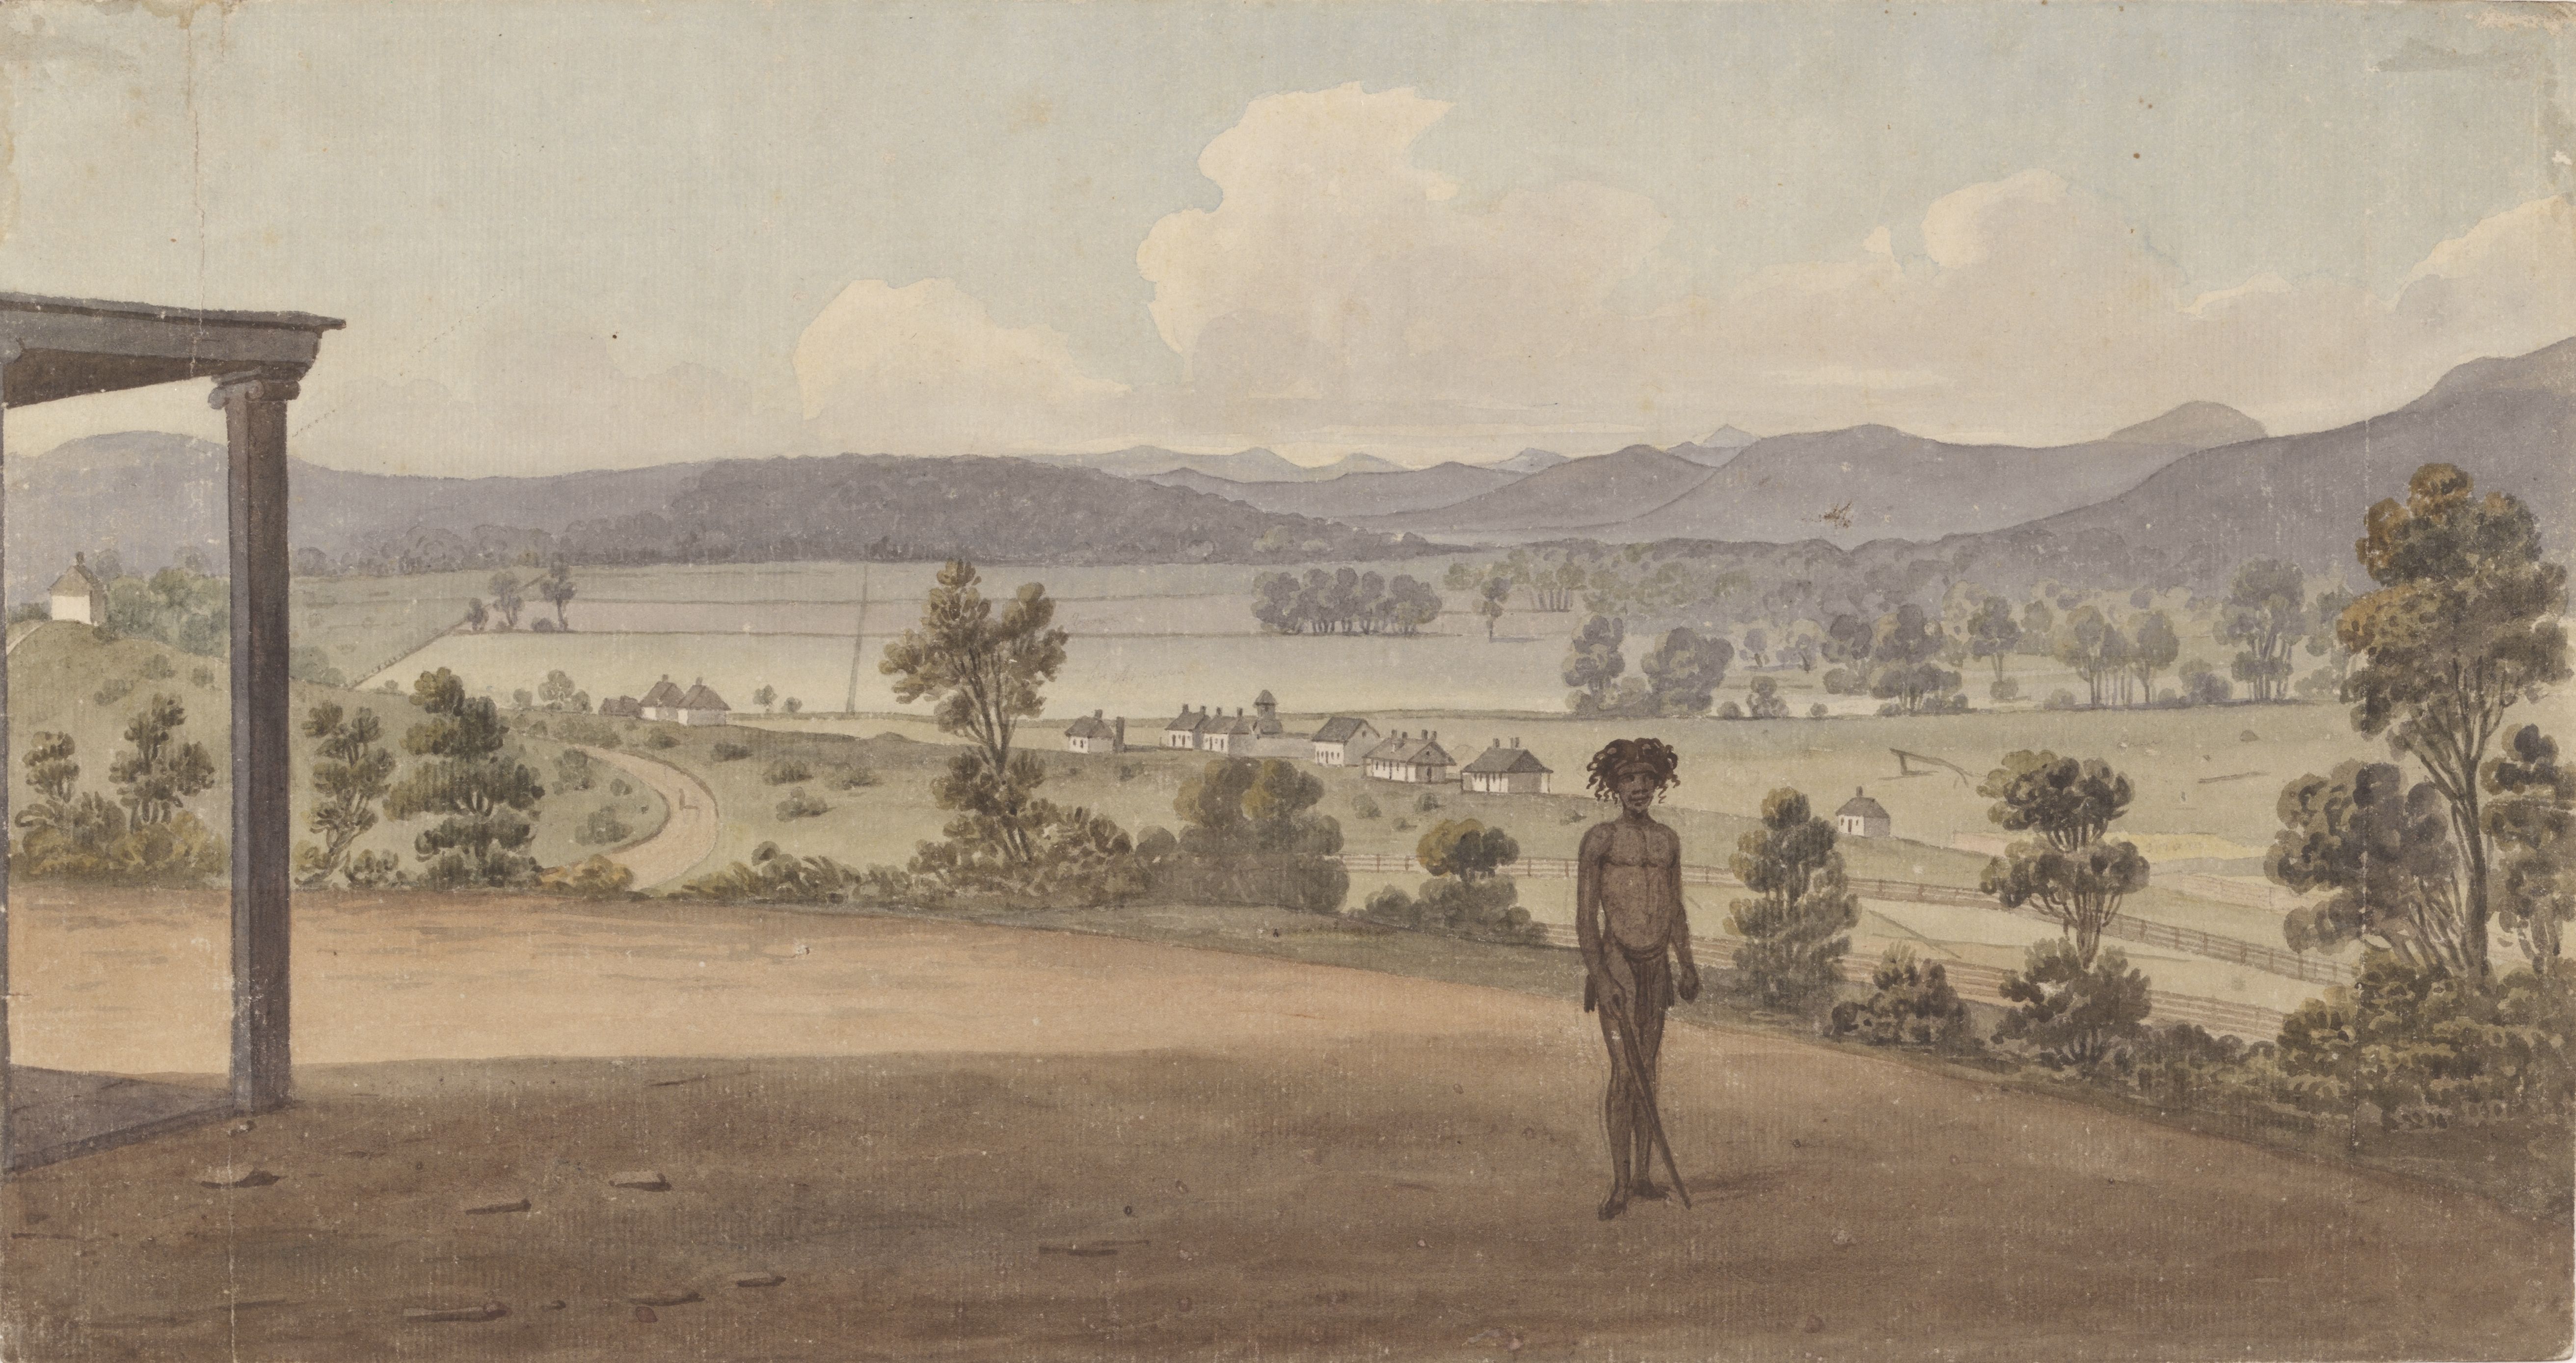 Paiting showing a first nations man in front of a vallay with what look like new buildings in the background